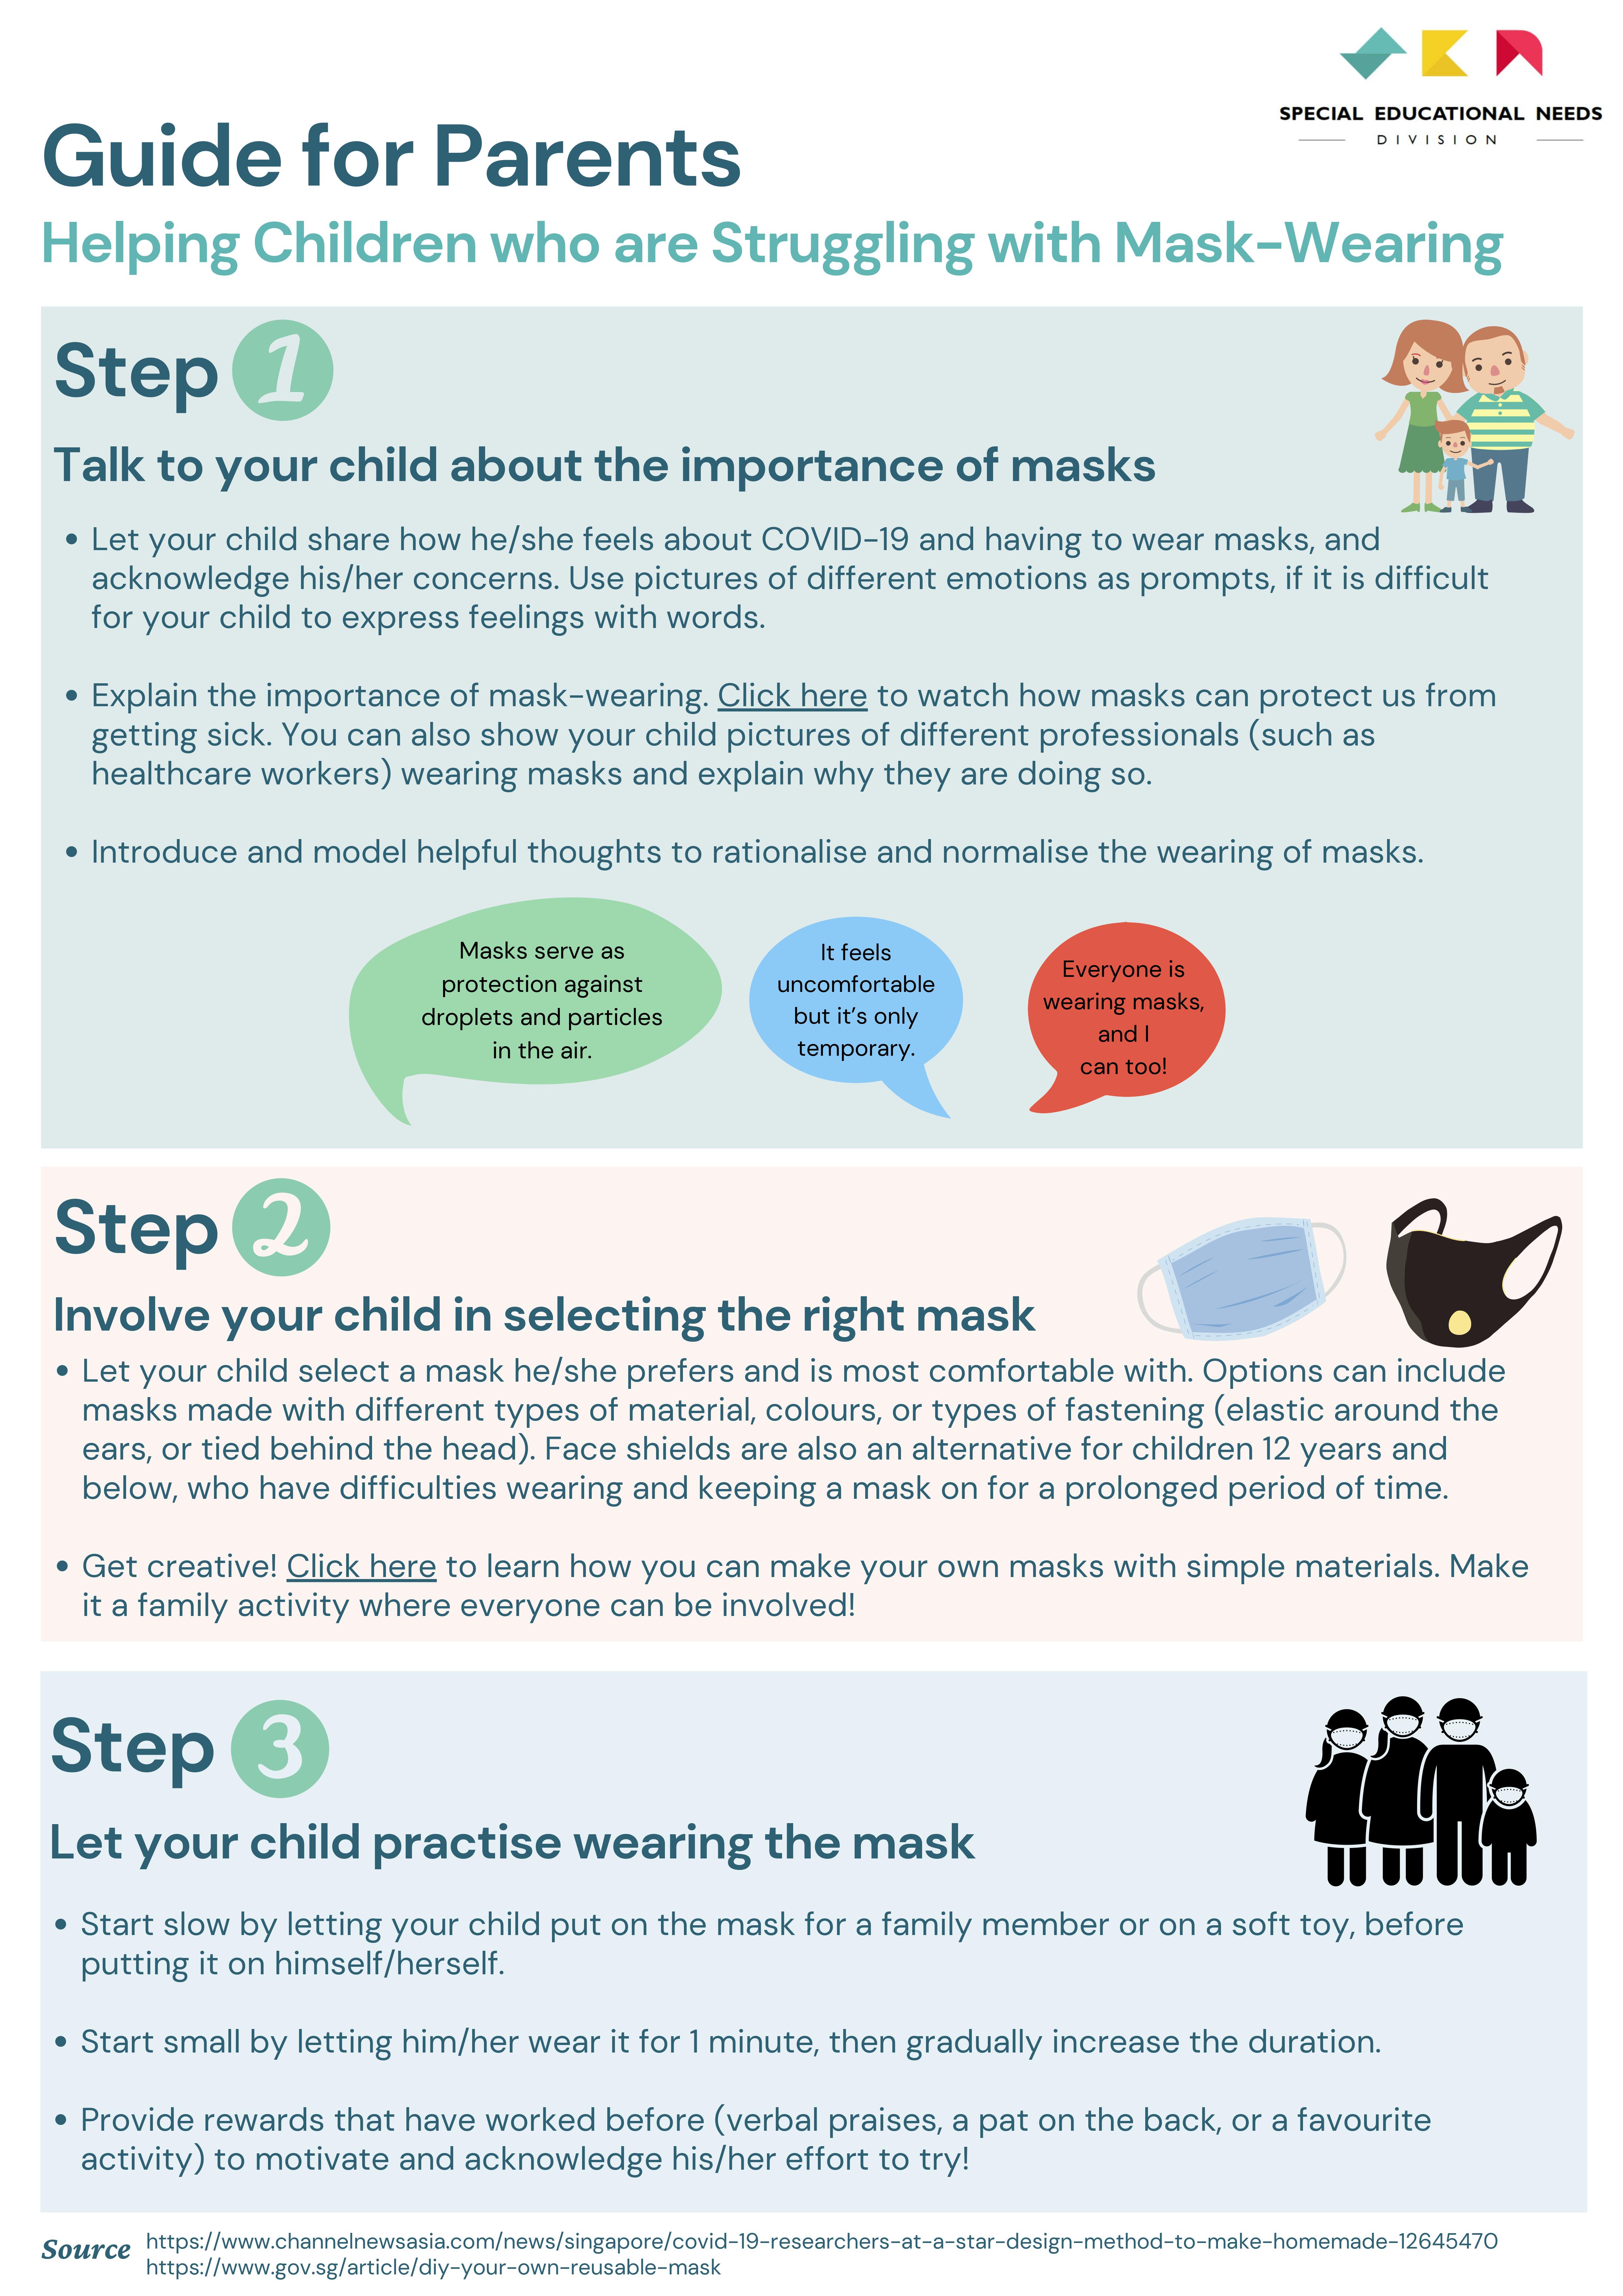 Revised Guide for Parents (Mask Wearing) 1